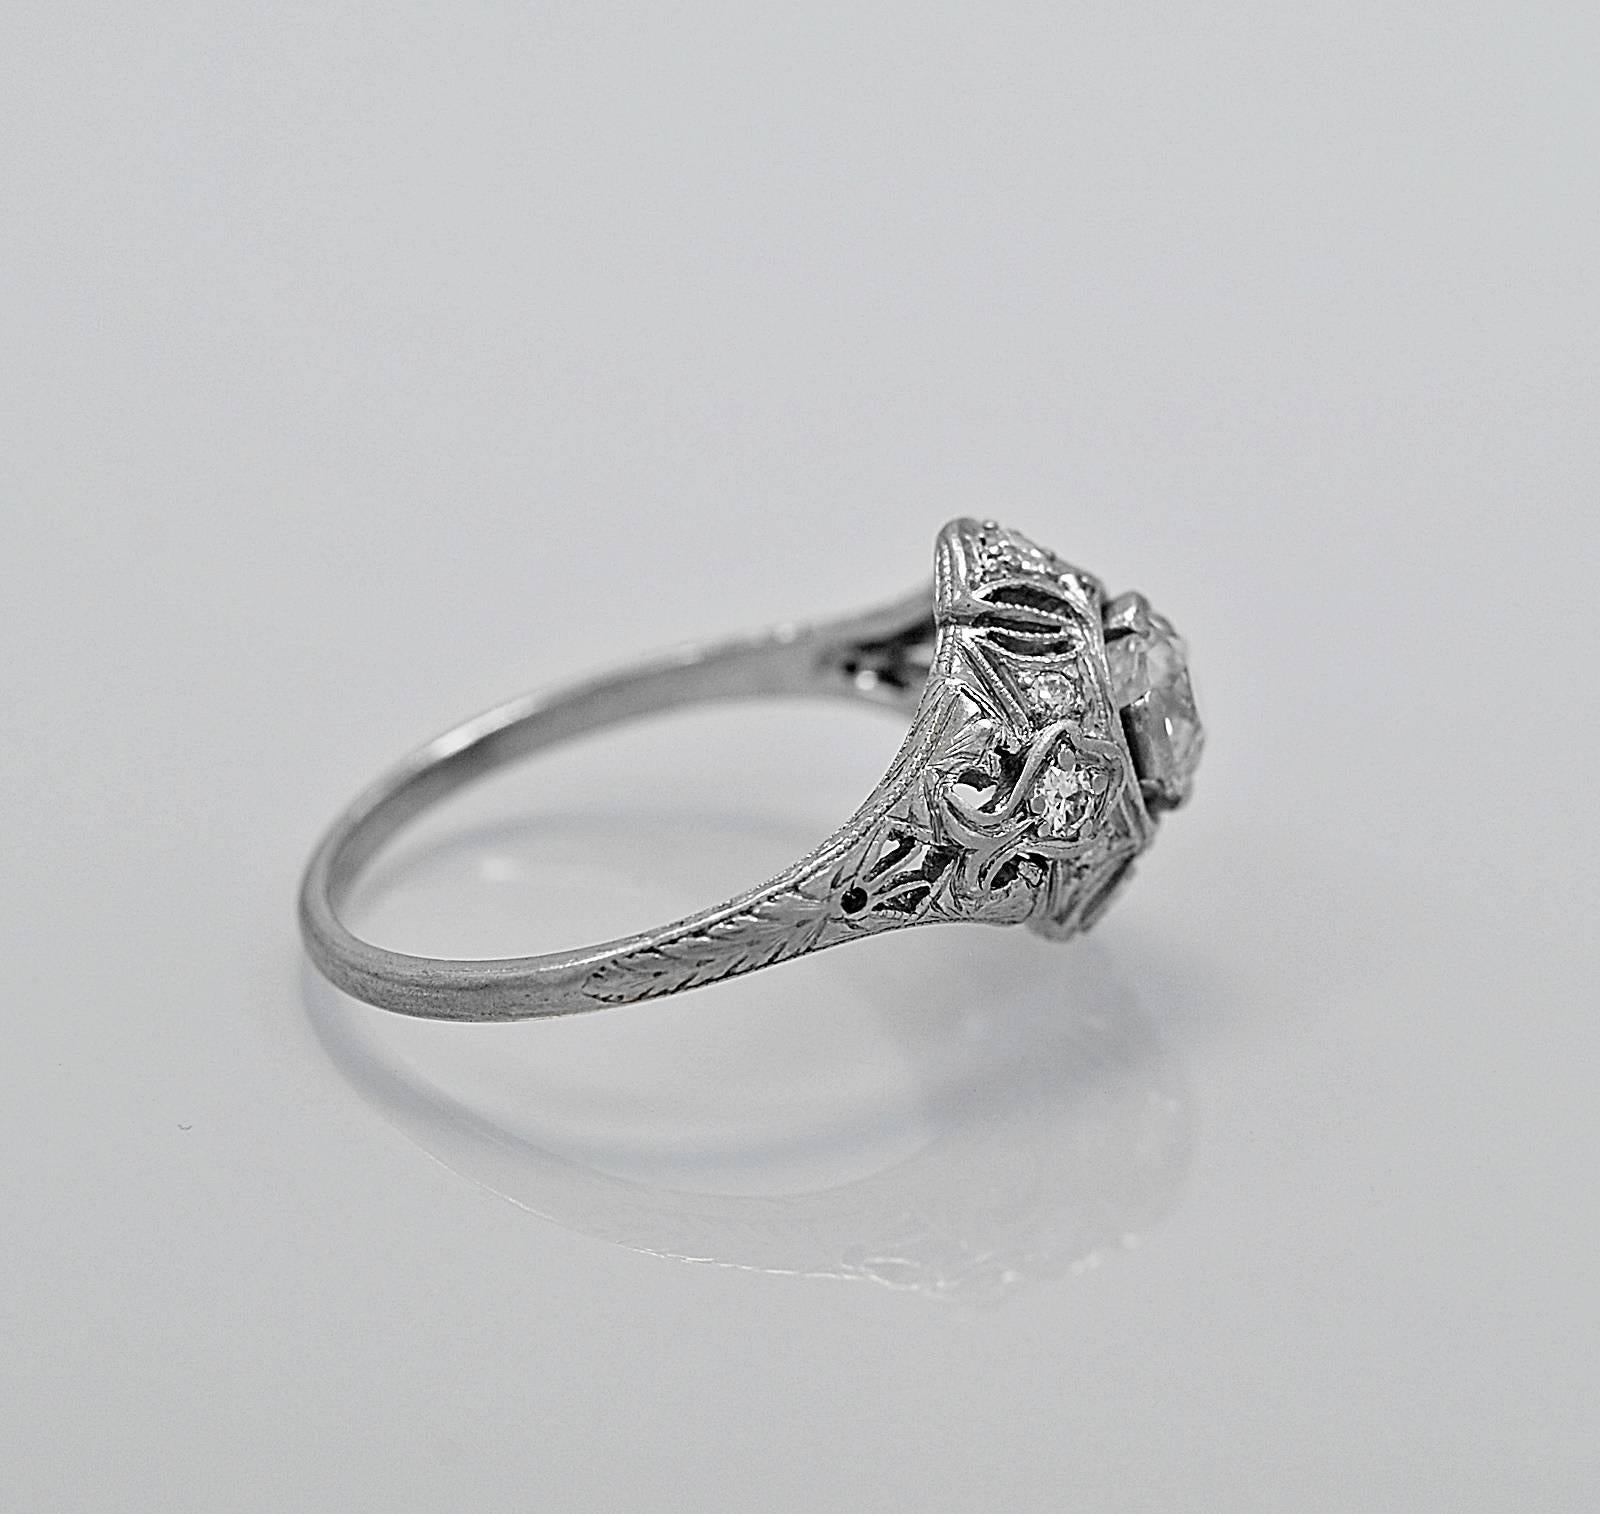 An Art Deco platinum and diamond antique engagement ring or fashion ring featuring a lovely .74ct. apx. center diamond of VS2 clarity and G-H color. The accenting diamonds are .16ct. apx. T.W. and are also fabulous quality. The ring is exquisitely